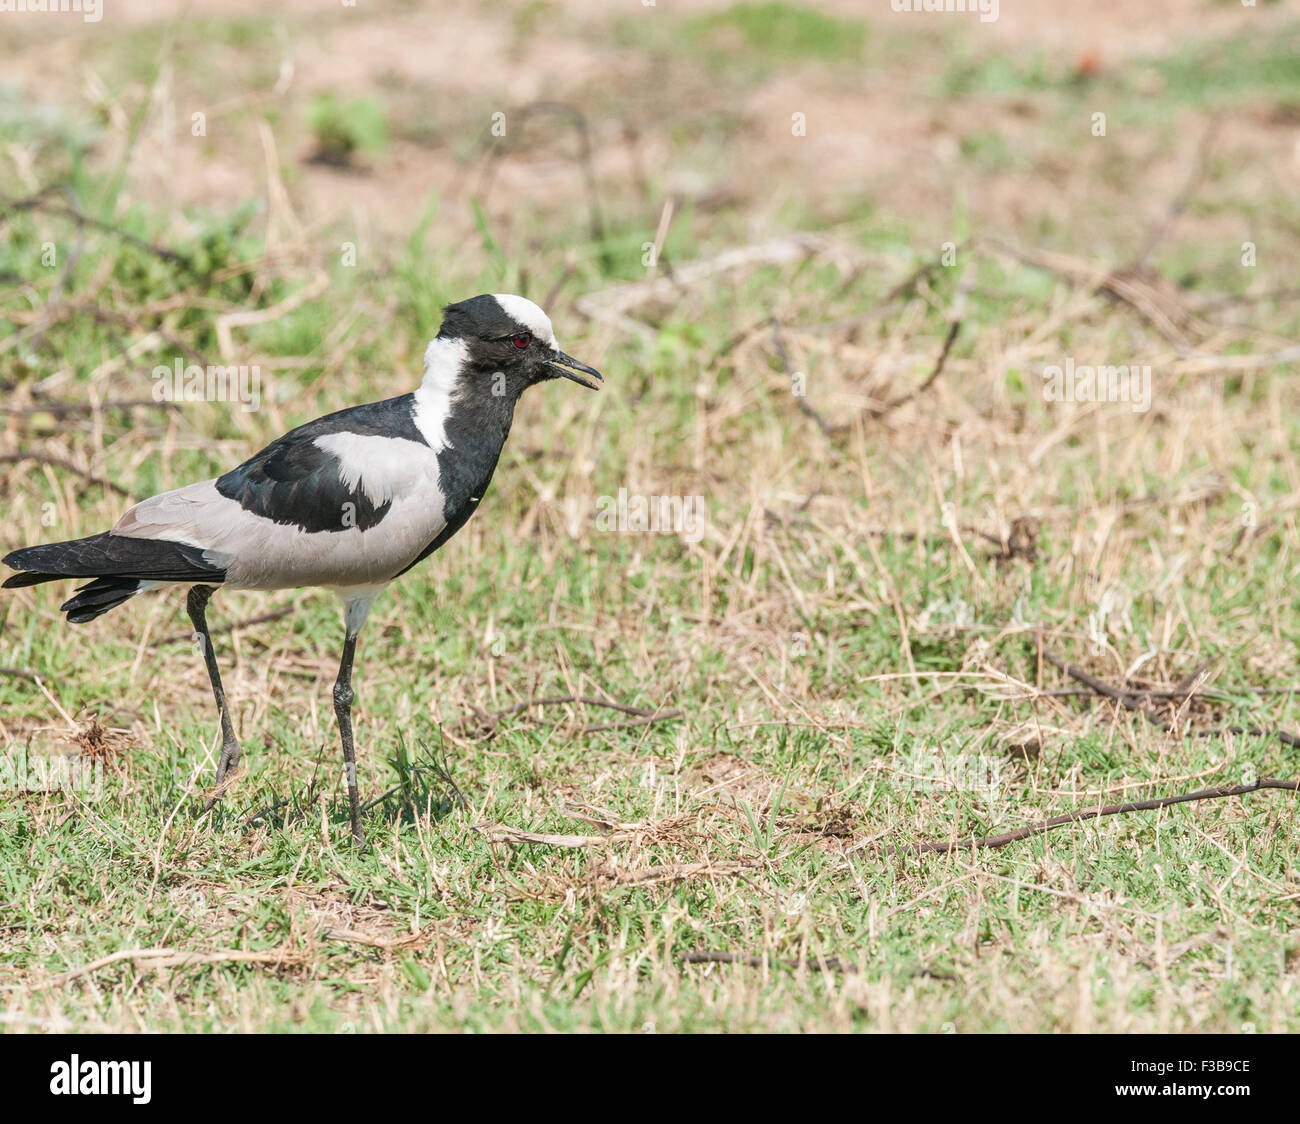 A blacksmith lapwing with its beak partially open foraging on the ground Stock Photo